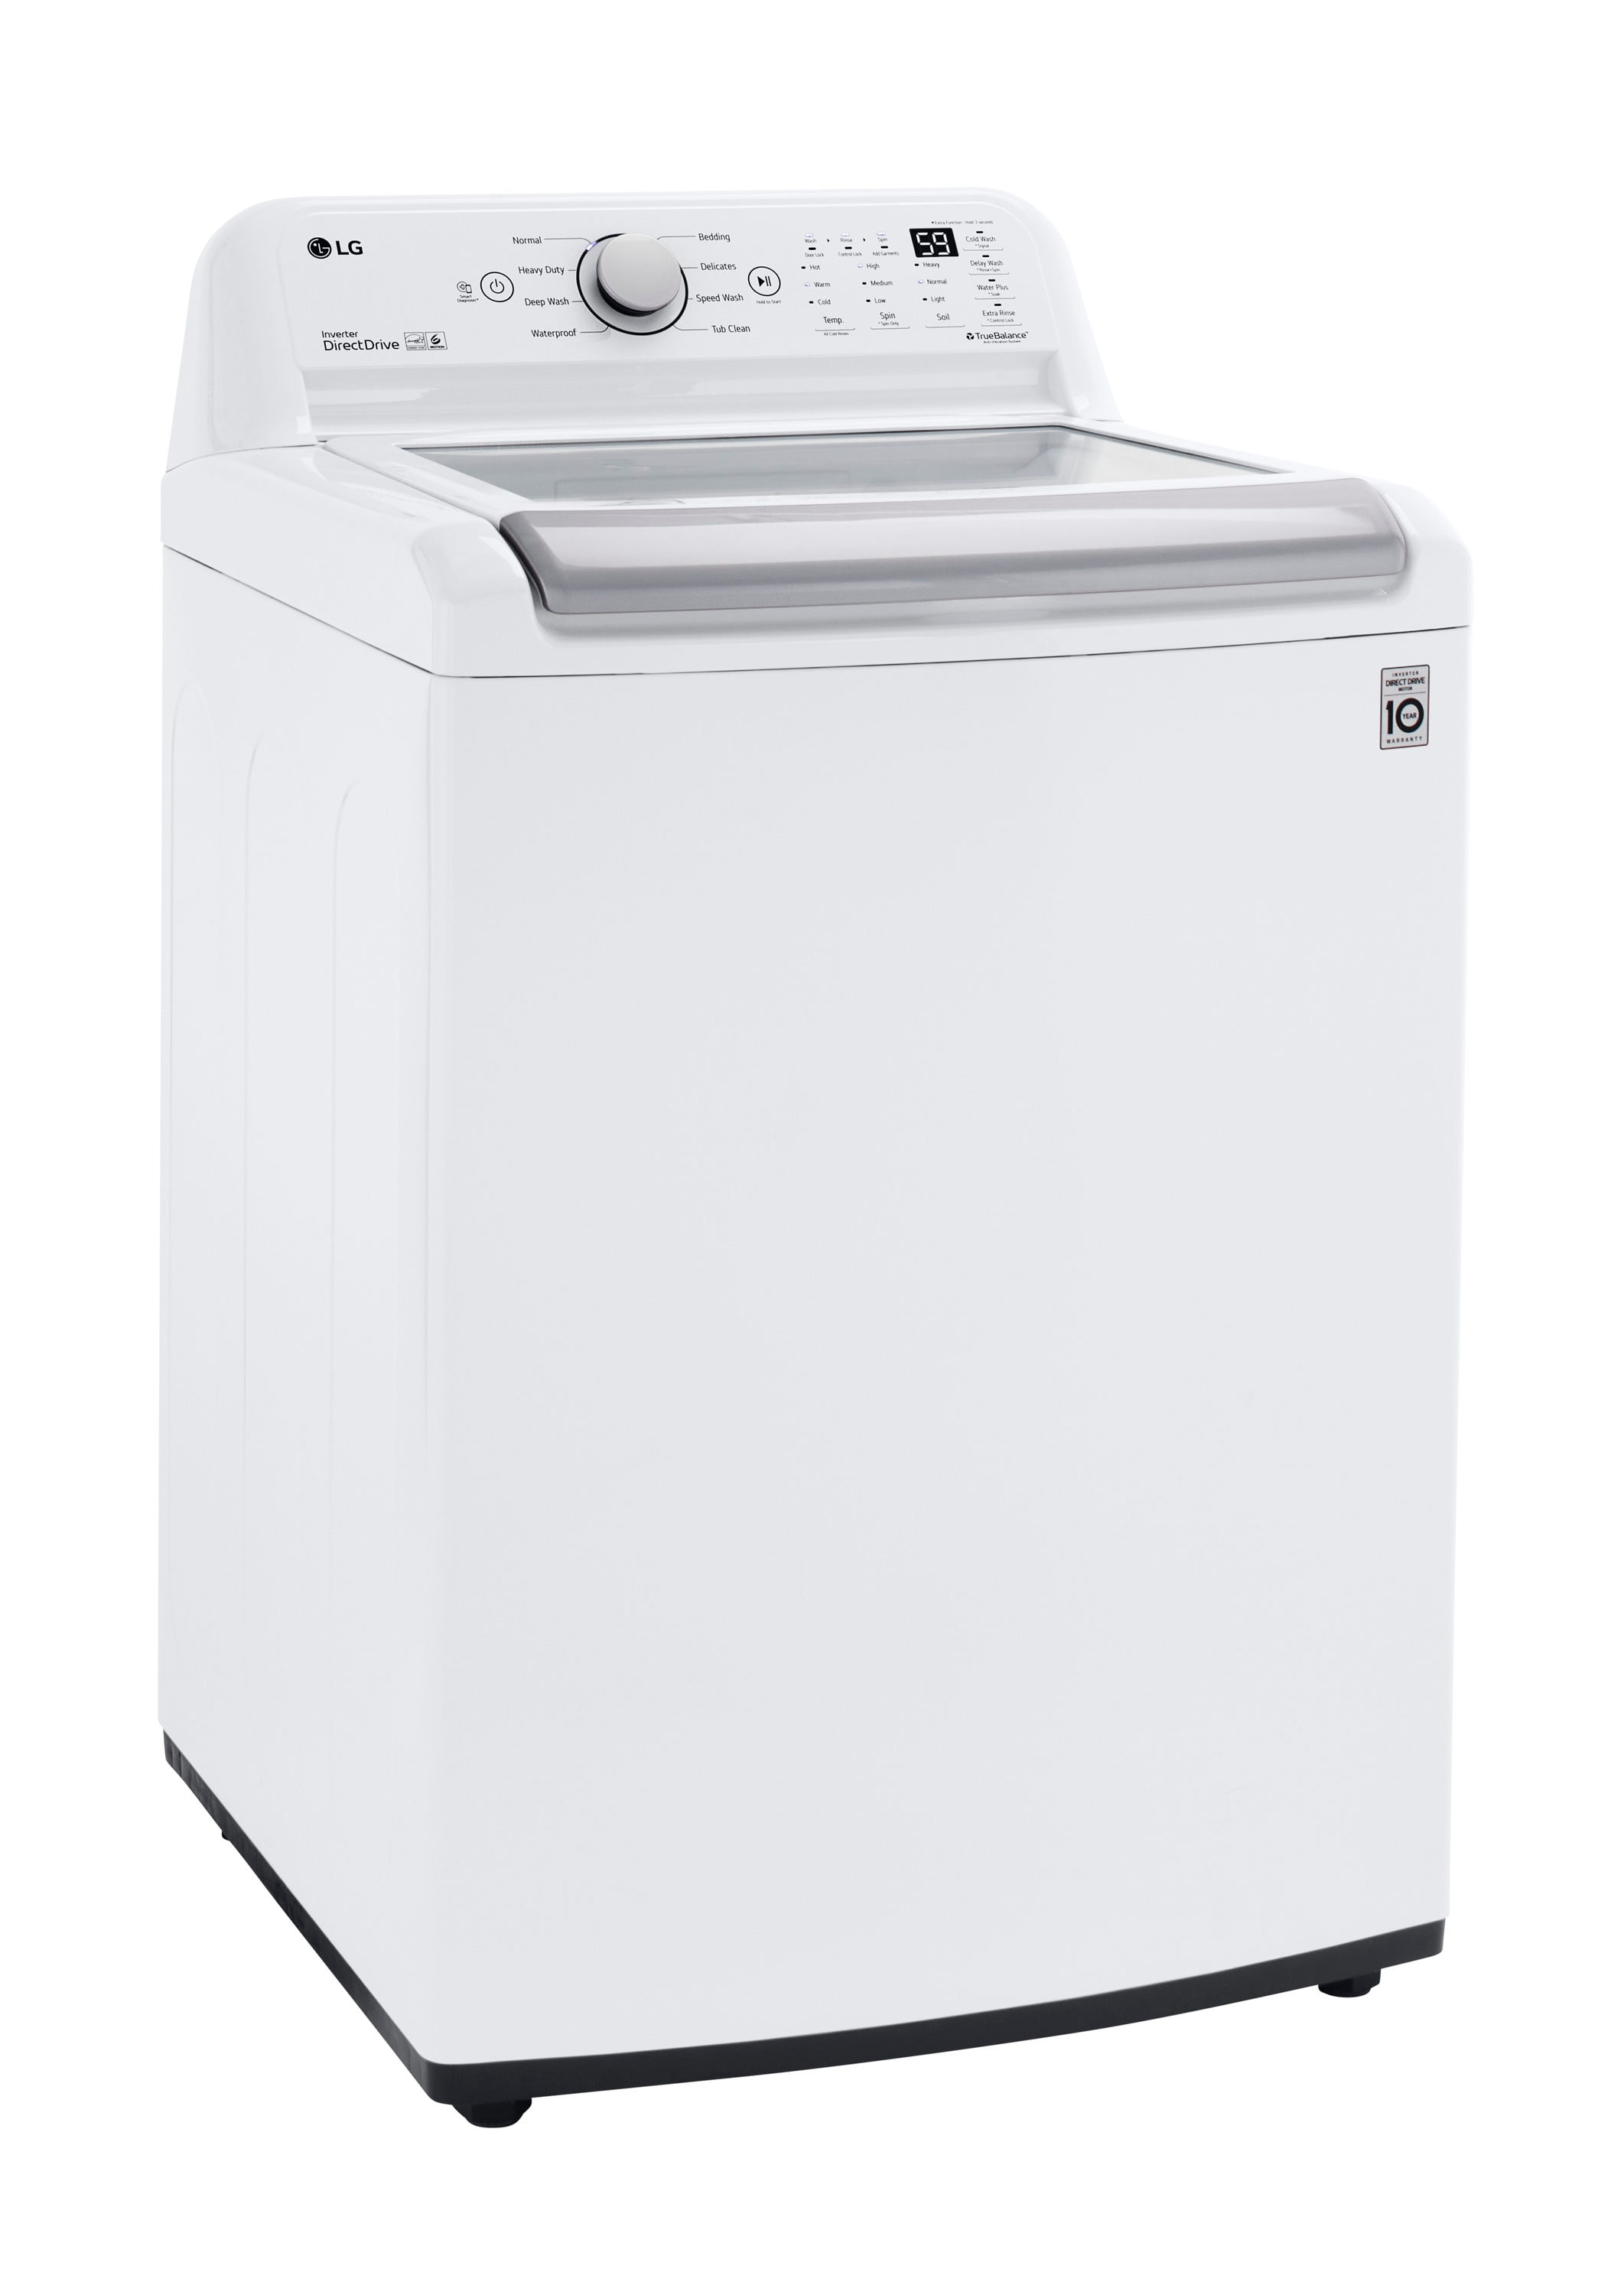 LG ColdWash 5-cu ft High Efficiency Washer (White) ENERGY STAR the Top-Load department at Lowes.com